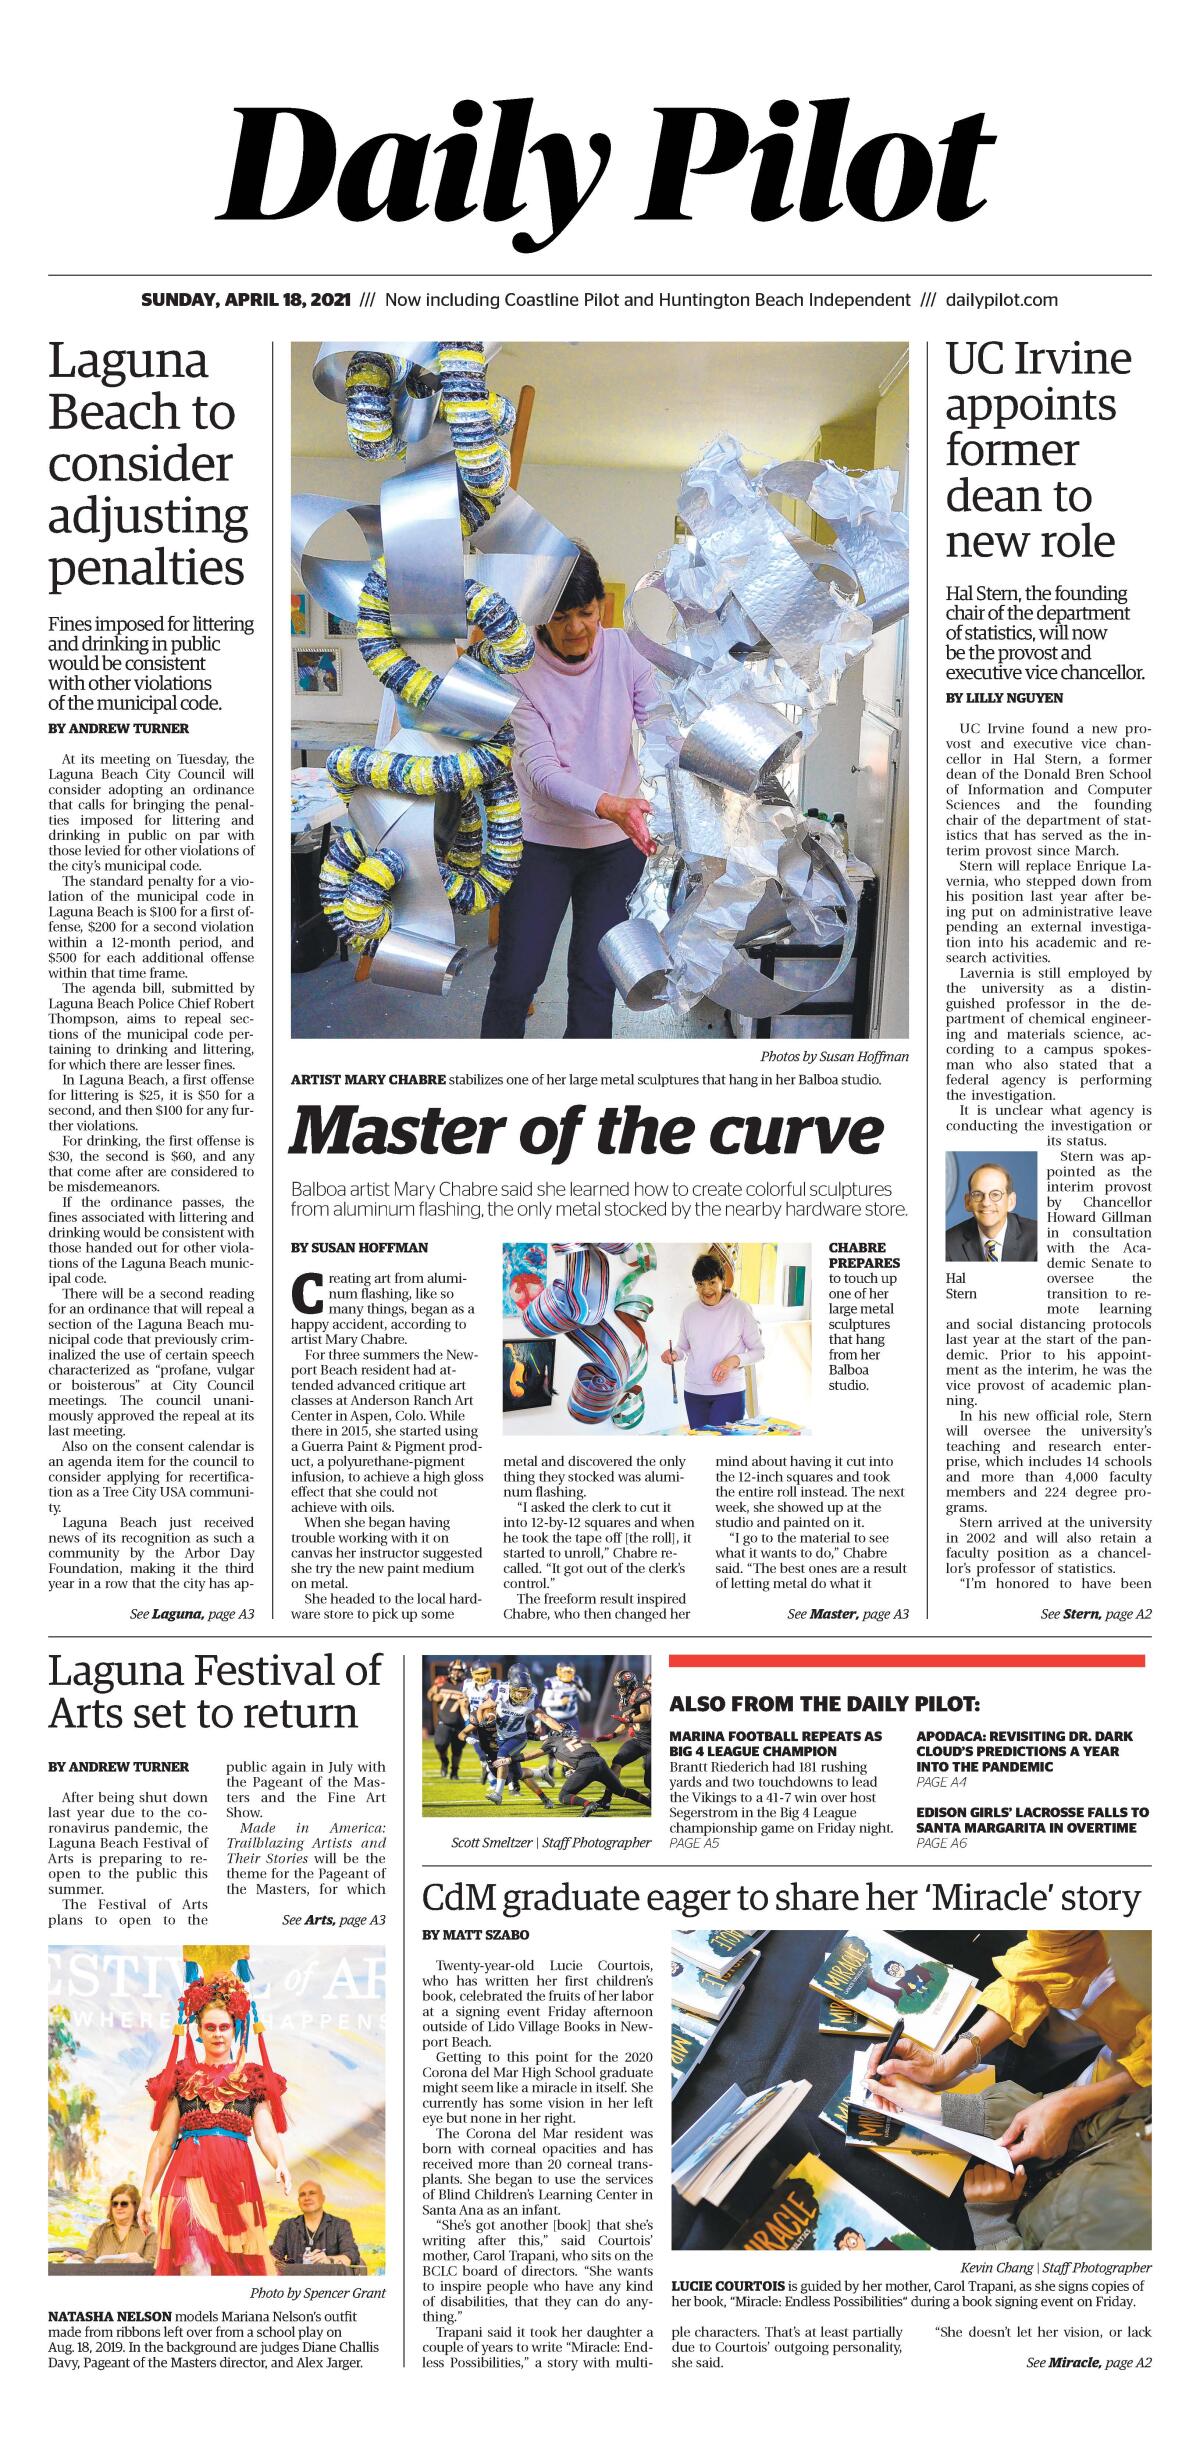 Front page of Daily Pilot e-newspaper for Sunday, April 18, 2021.